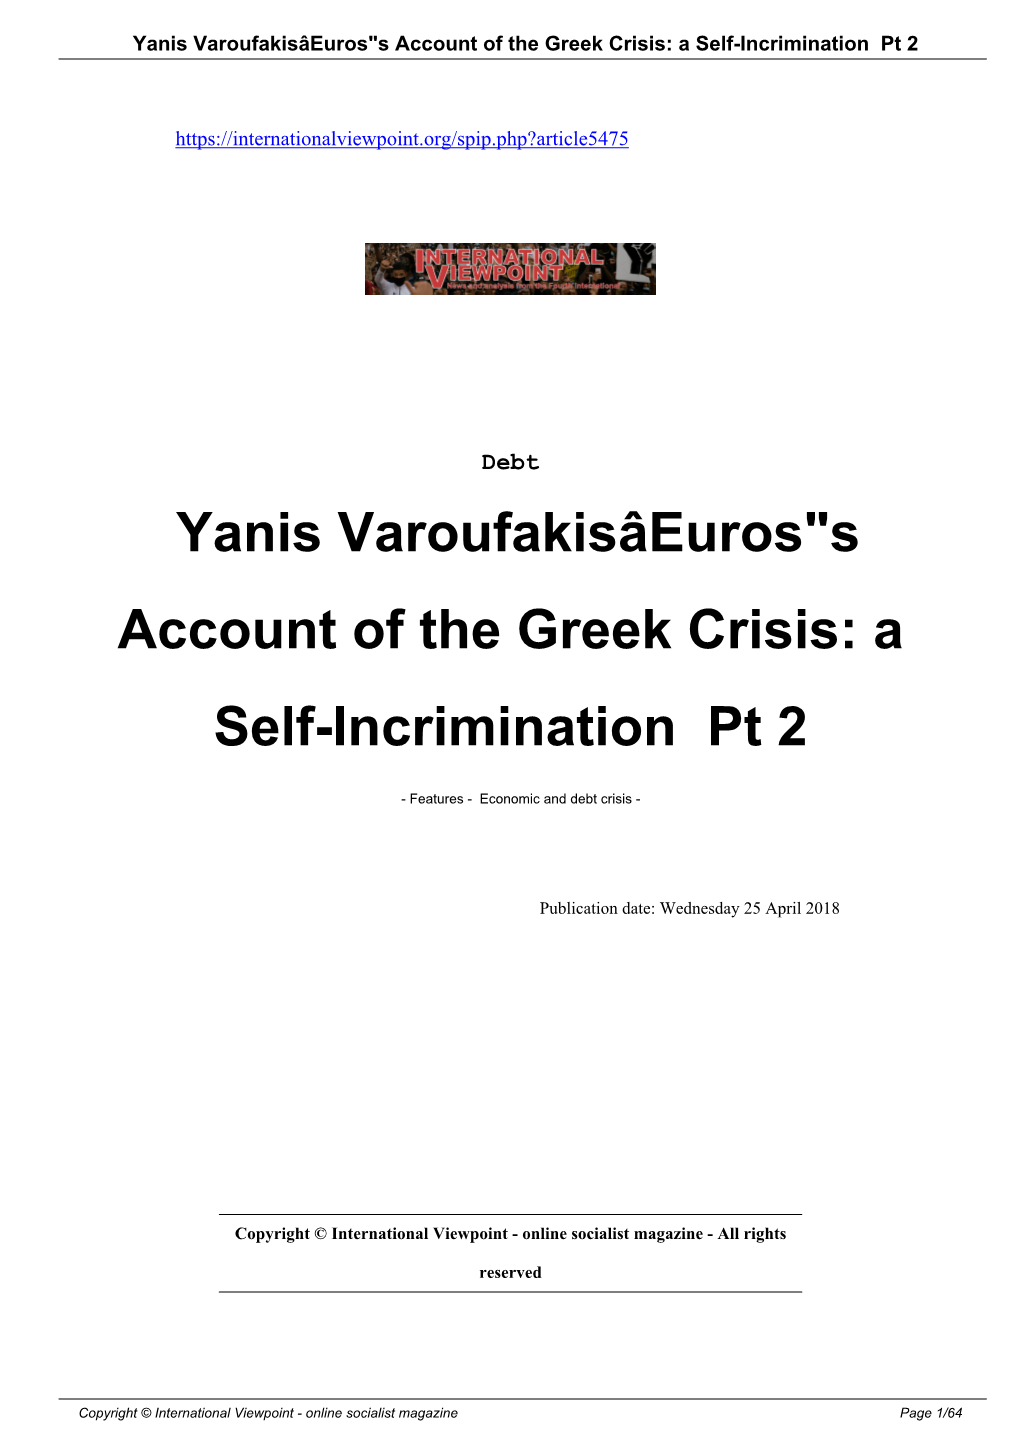 S Account of the Greek Crisis: a Self-Incrimination Pt 2